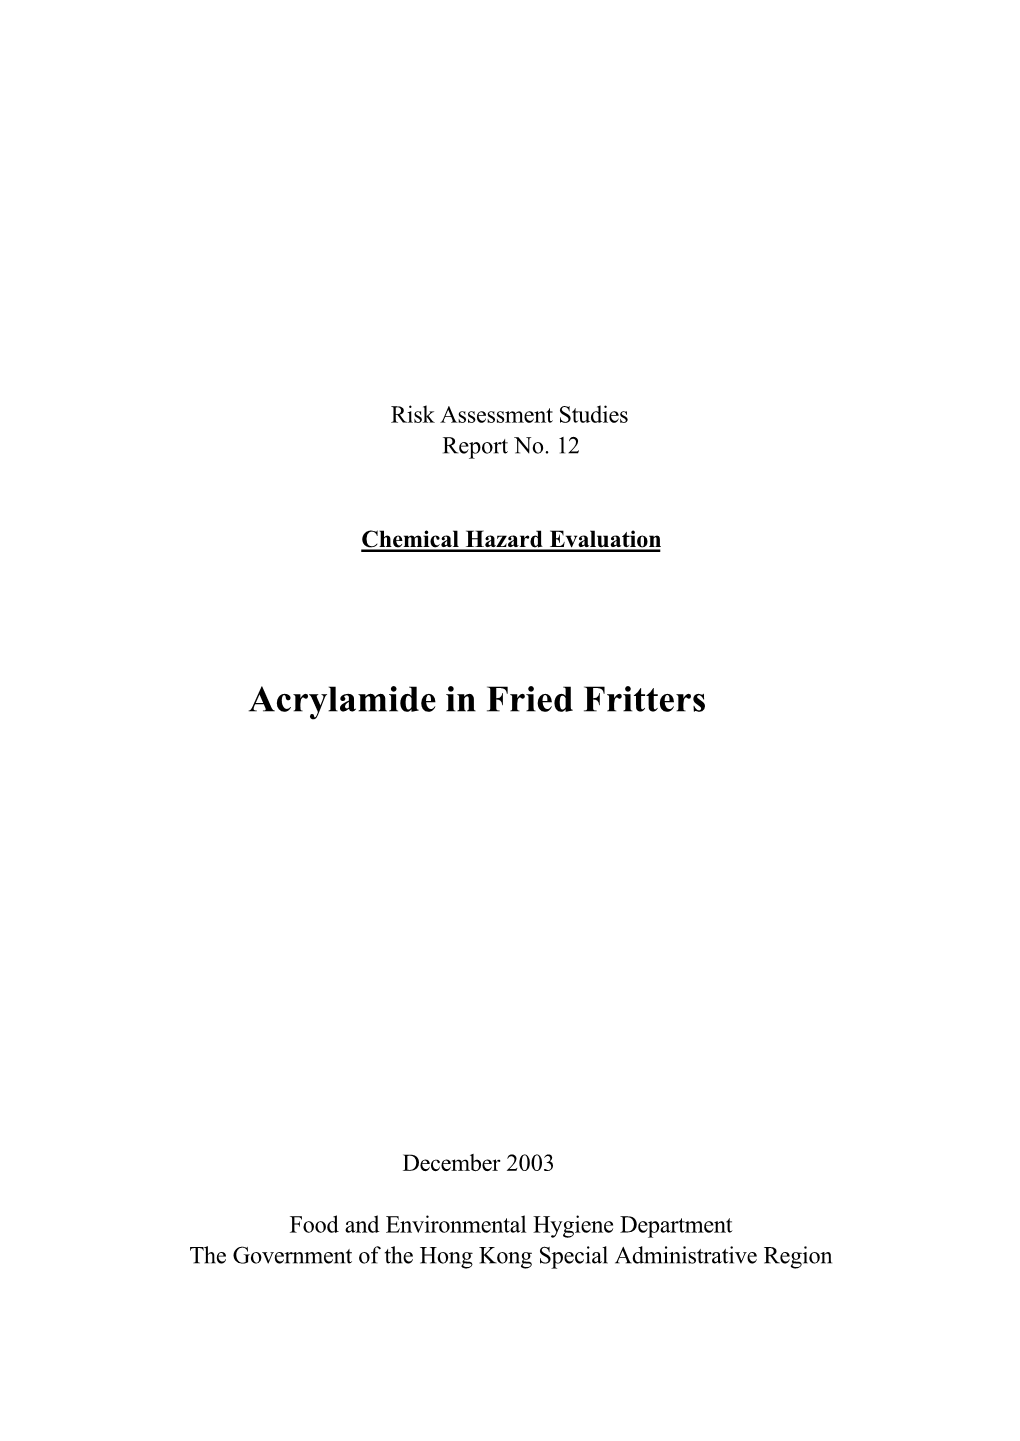 Acrylamide in Fried Fritters